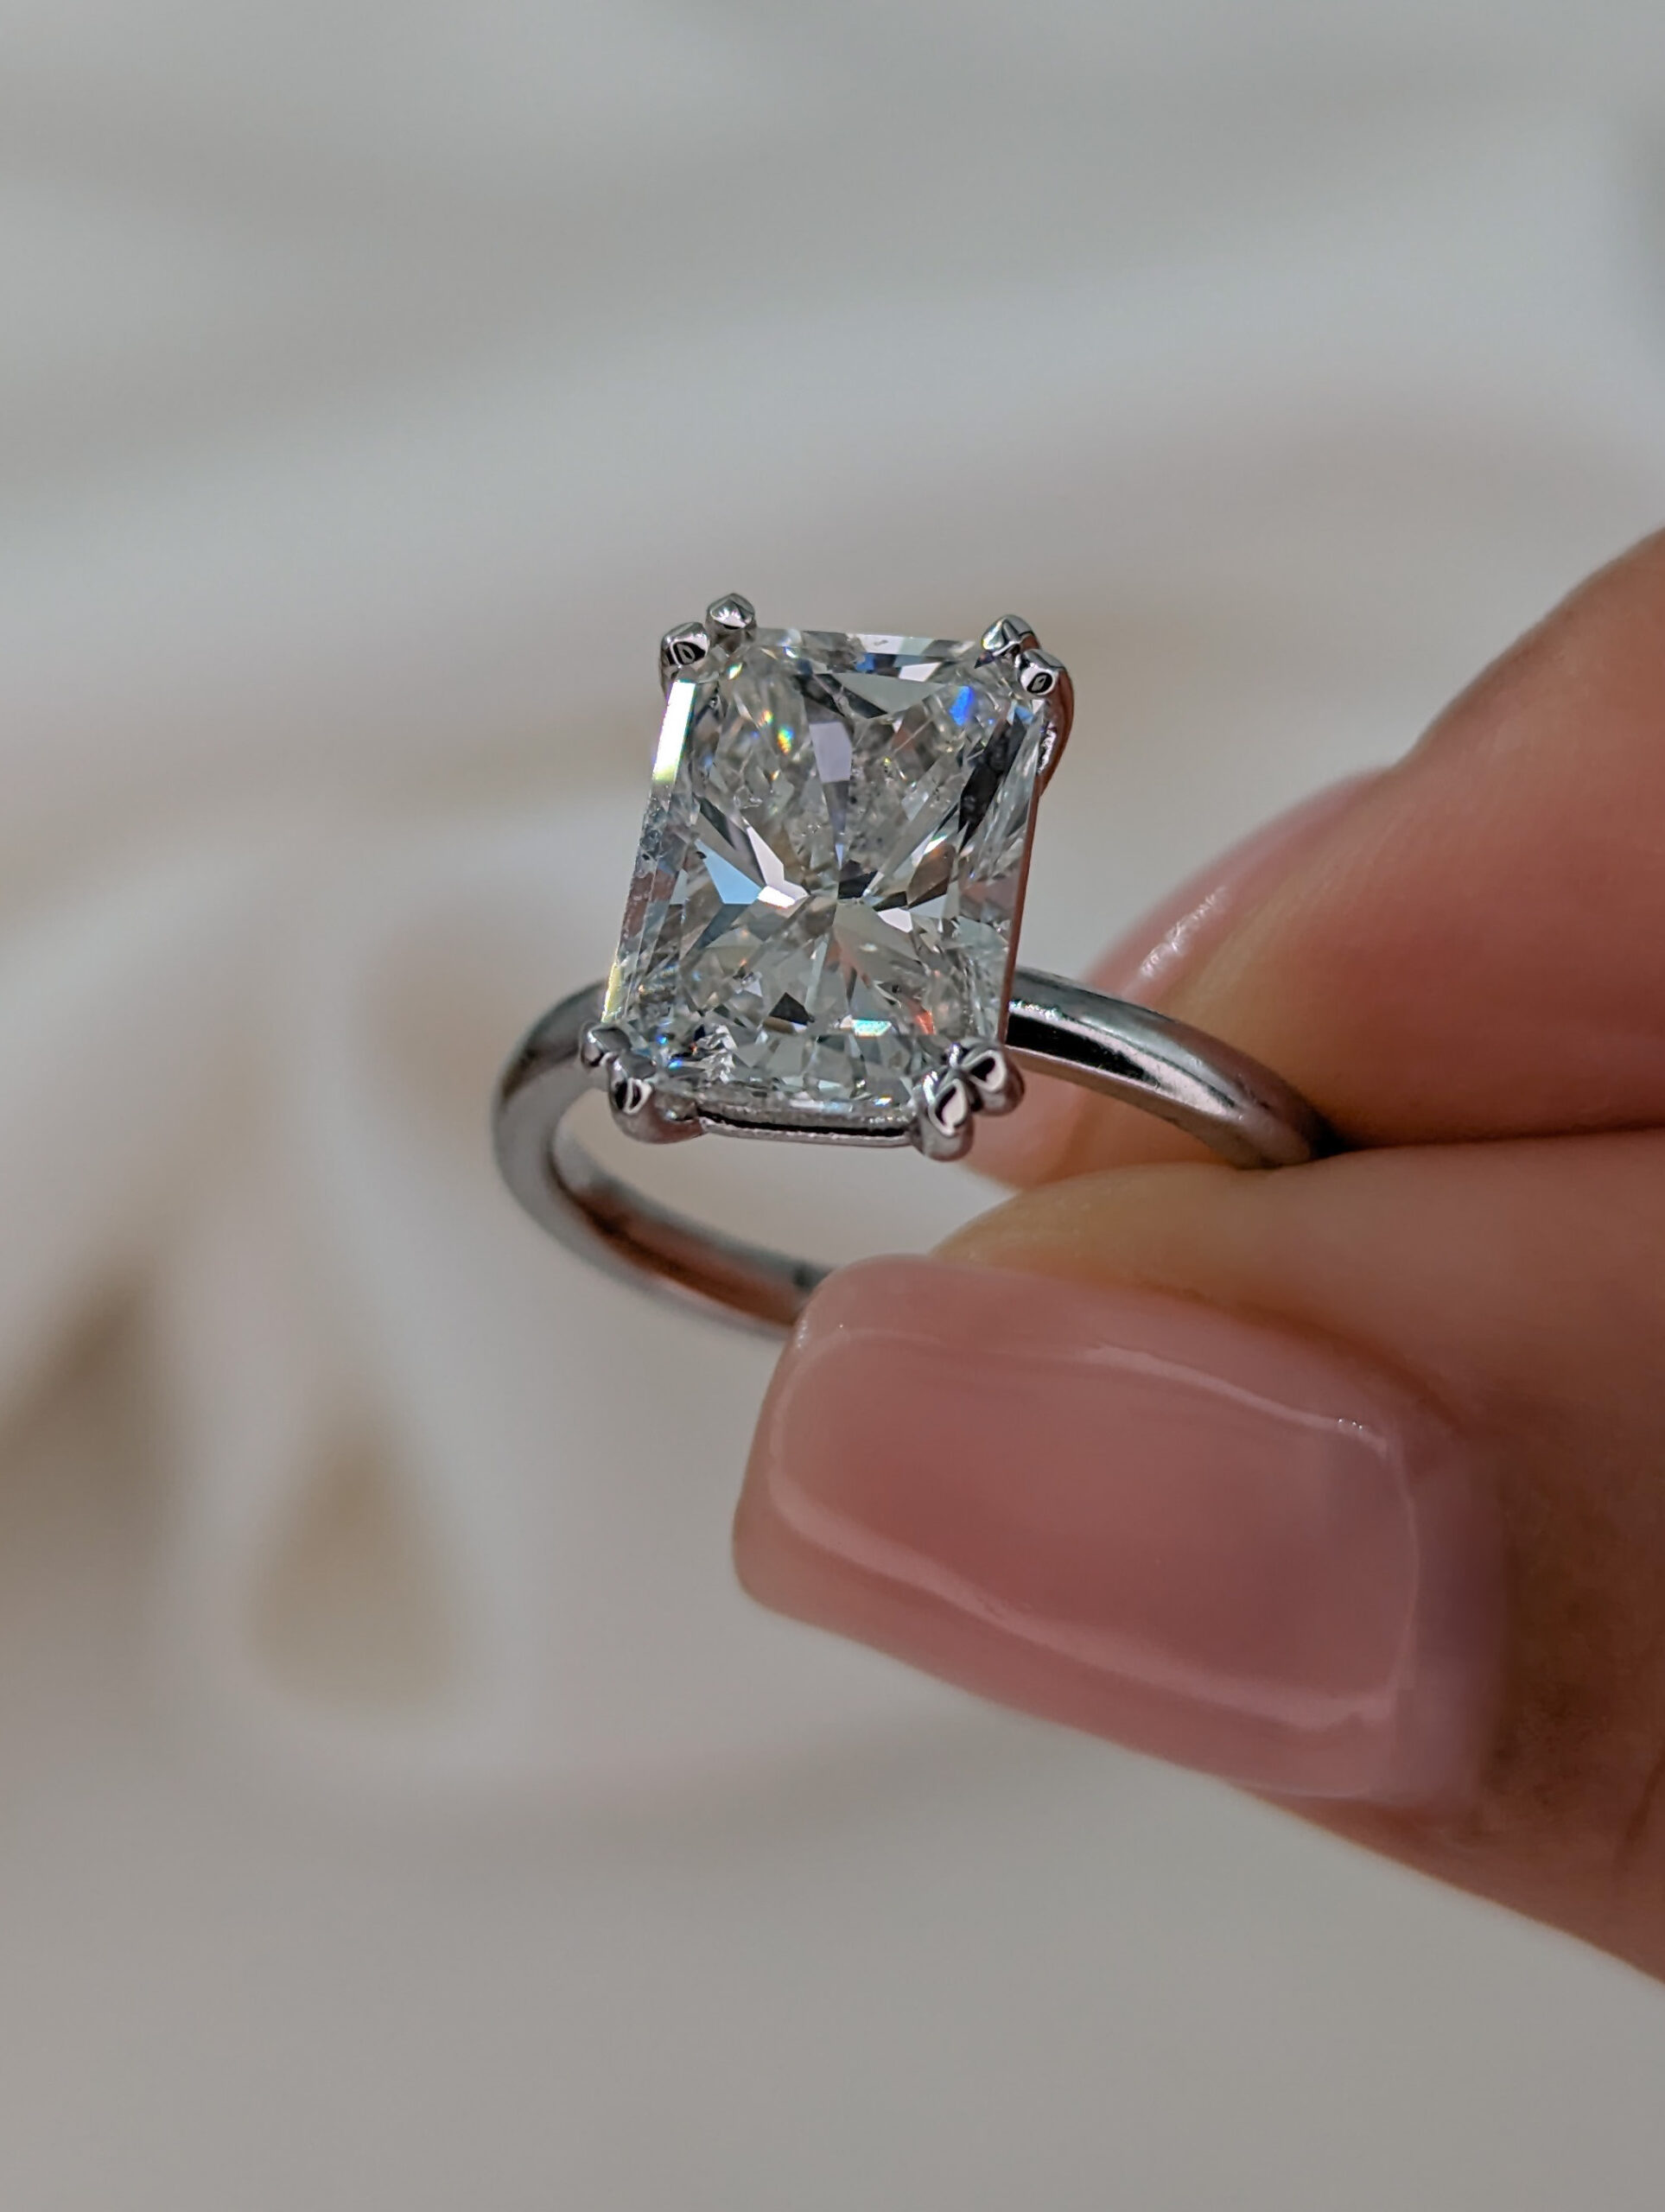 4 carat Round Diamond Solitaire Engagement Ring - YouTube